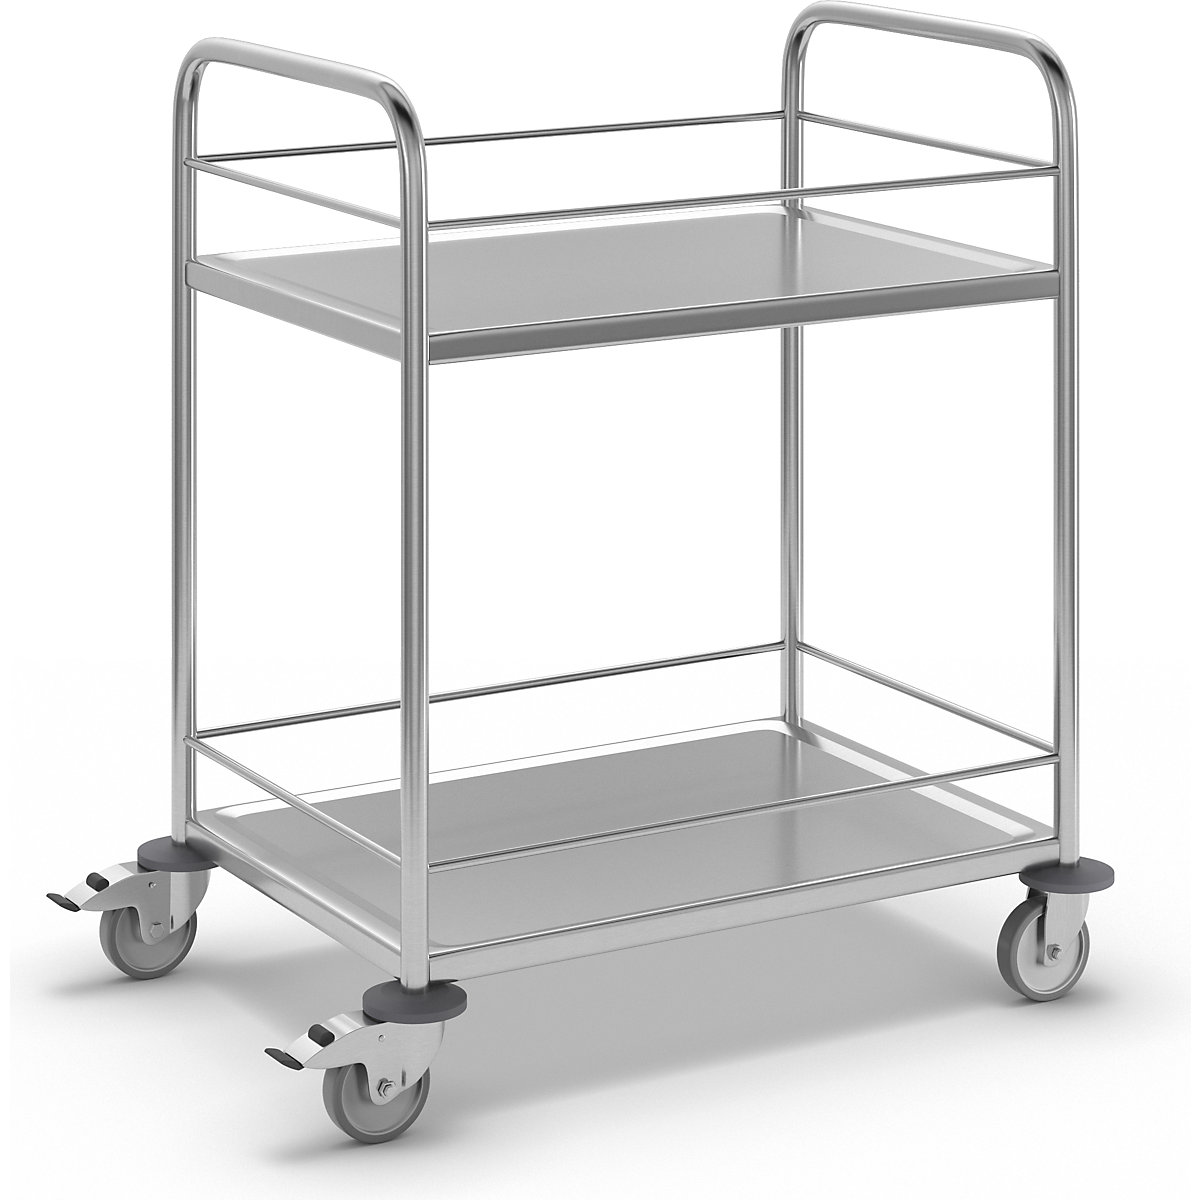 Stainless steel serving trolley – Kongamek, LxWxH 910 x 590 x 940 mm, with 2 shelves and raised edge-9